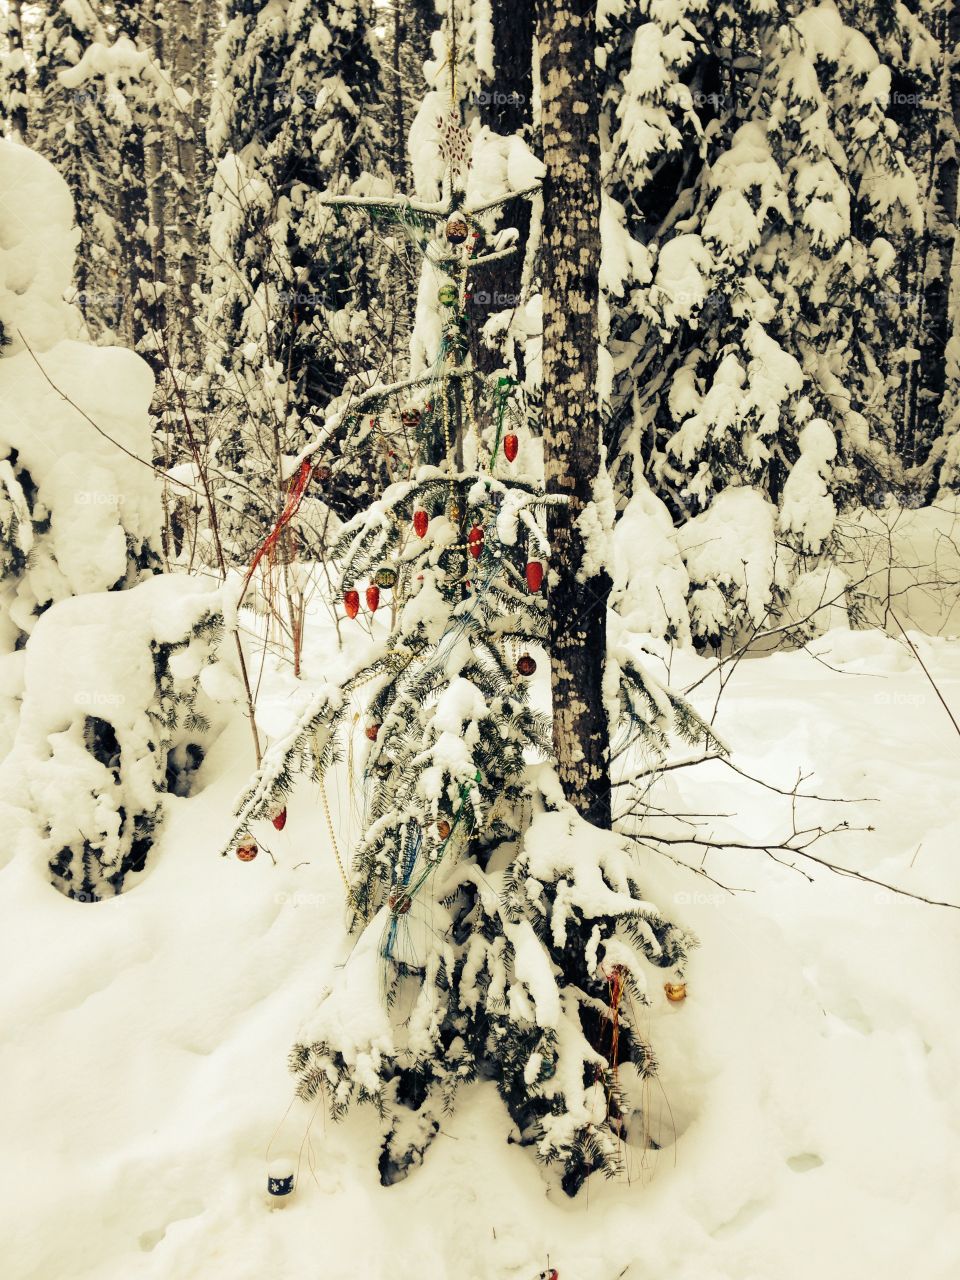 Christmas tree in the bush. Decorated tree on snowshoe trail in the bush